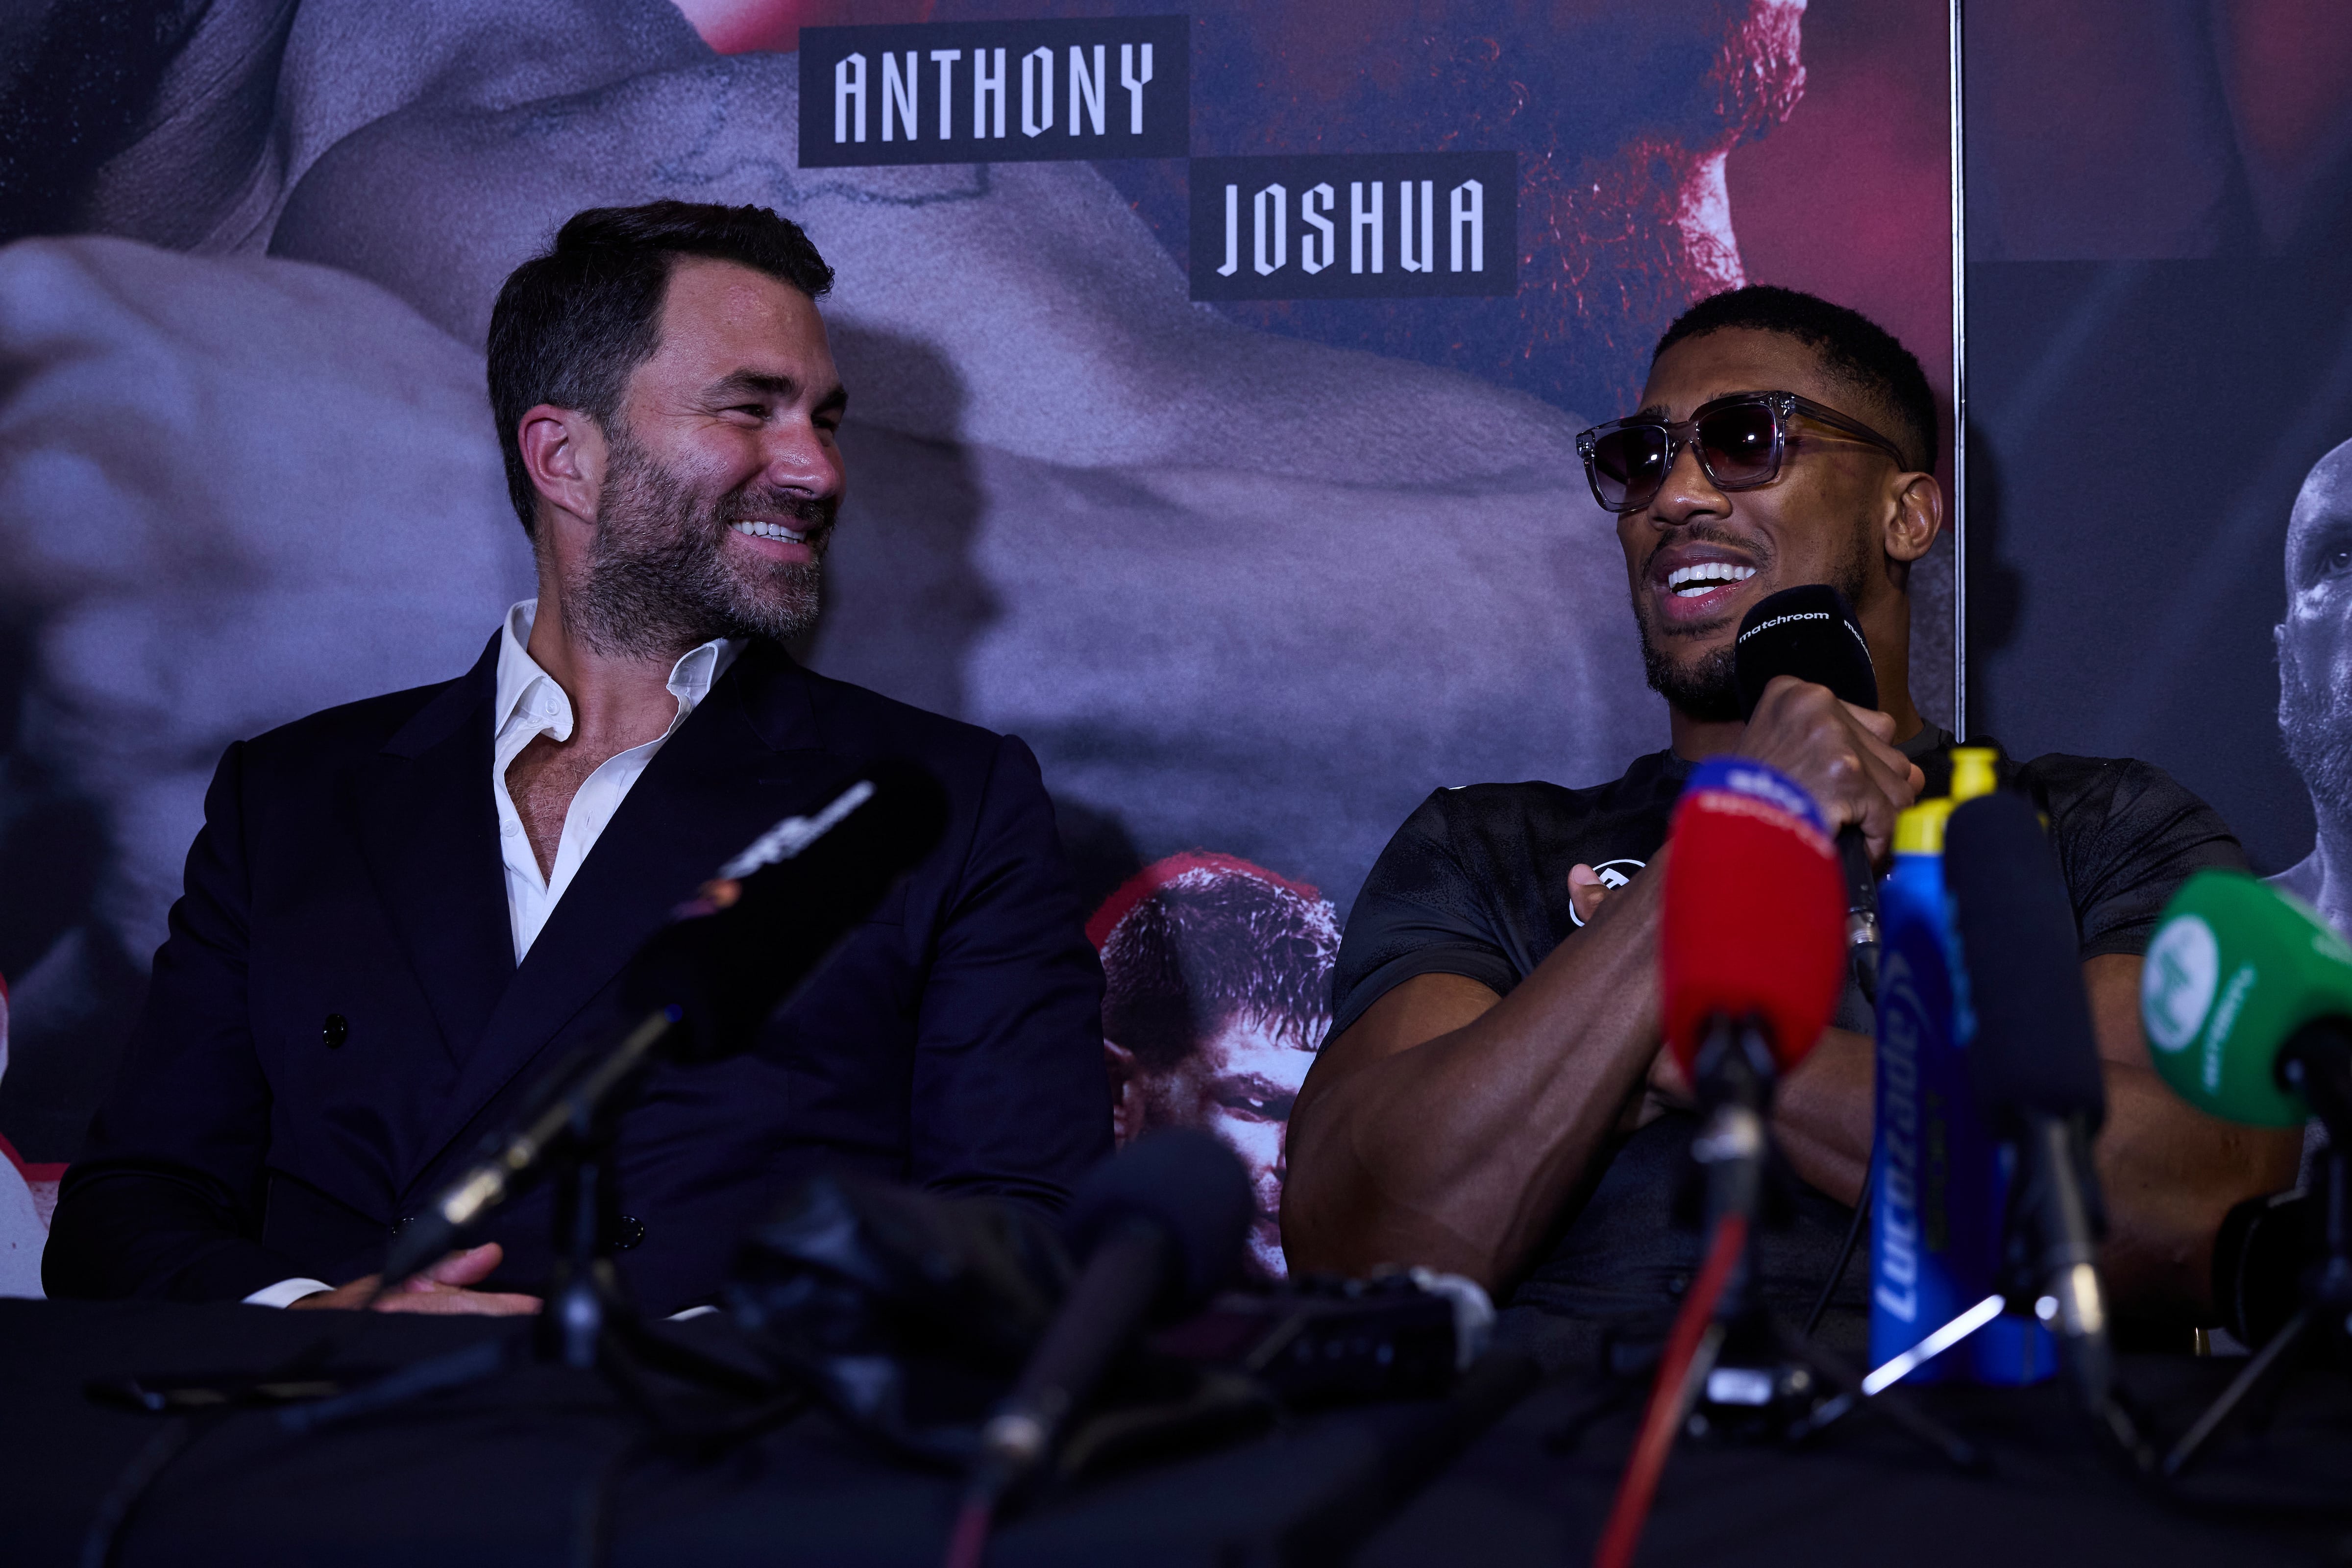 Joshua could return in December according to Hearn if Wilder fight gets pushed back 